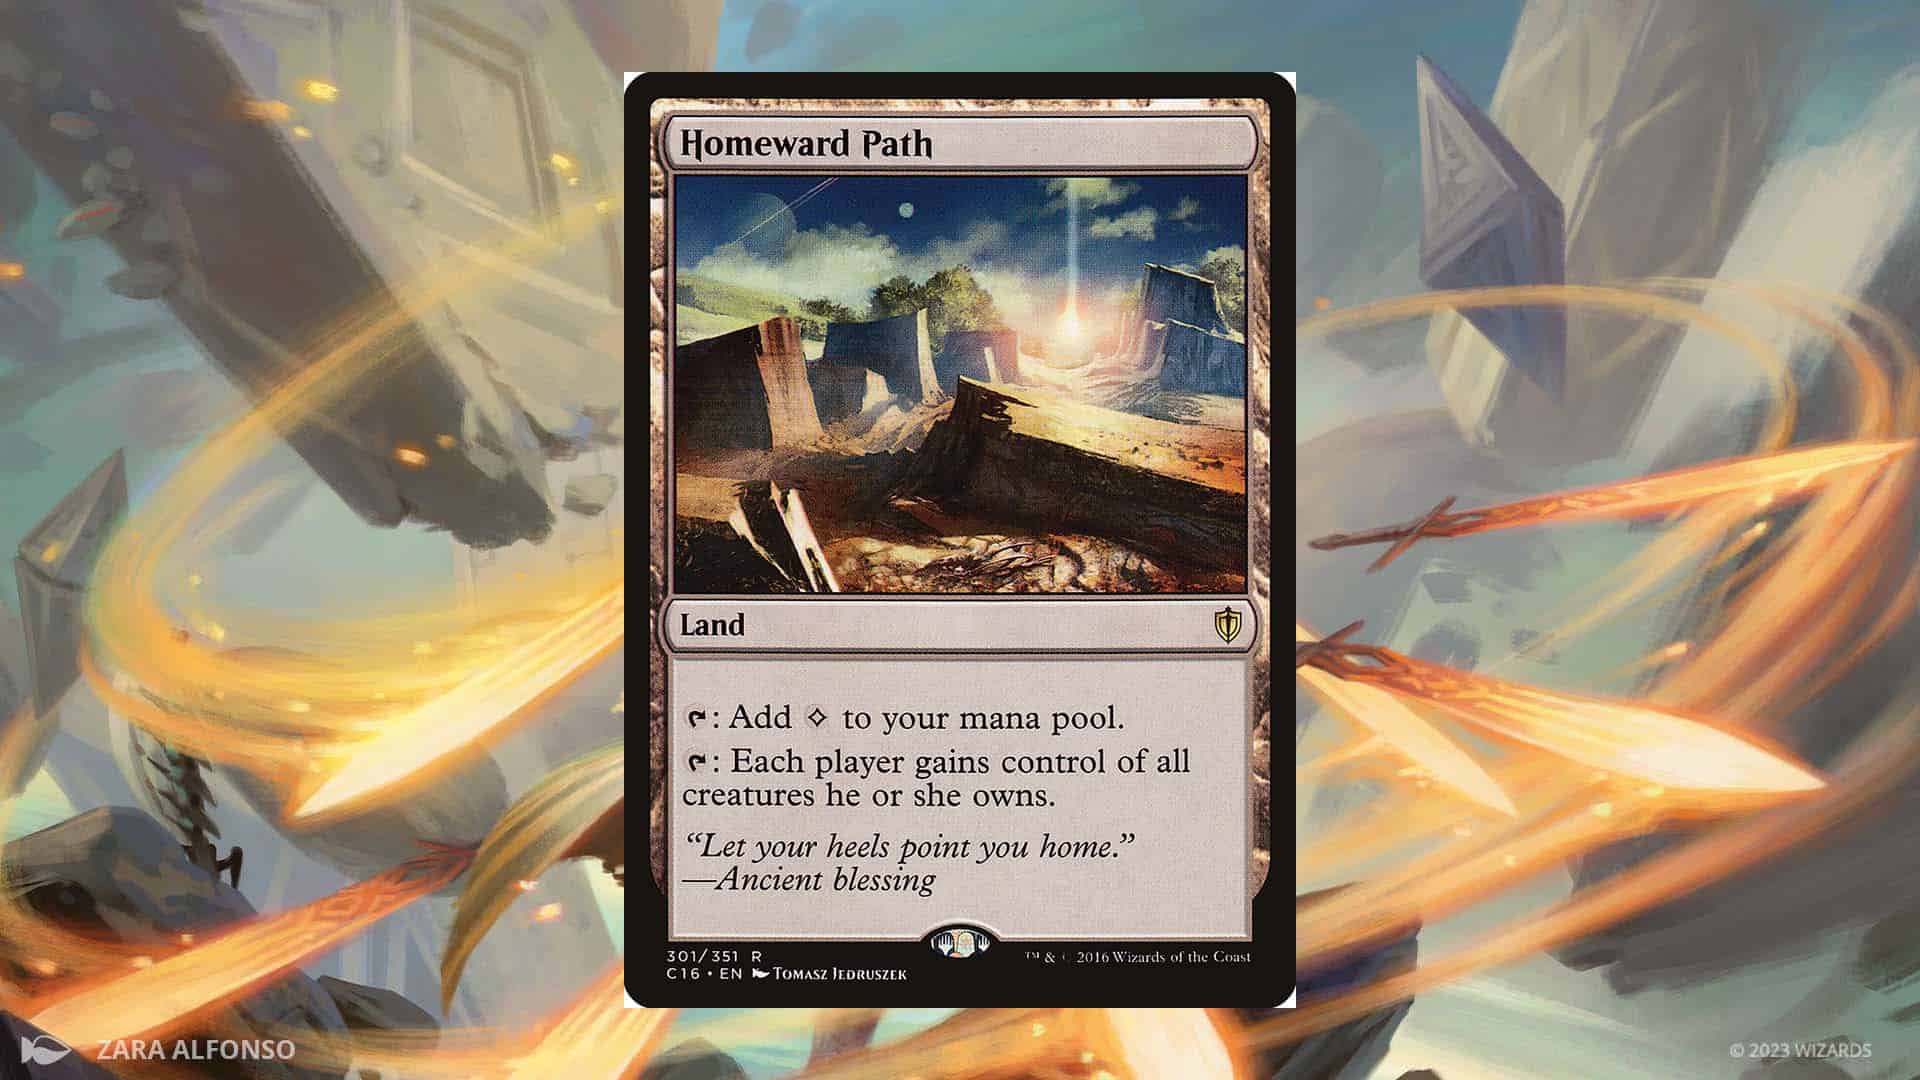 Picture of Homeward Path from Magic: the Gathering